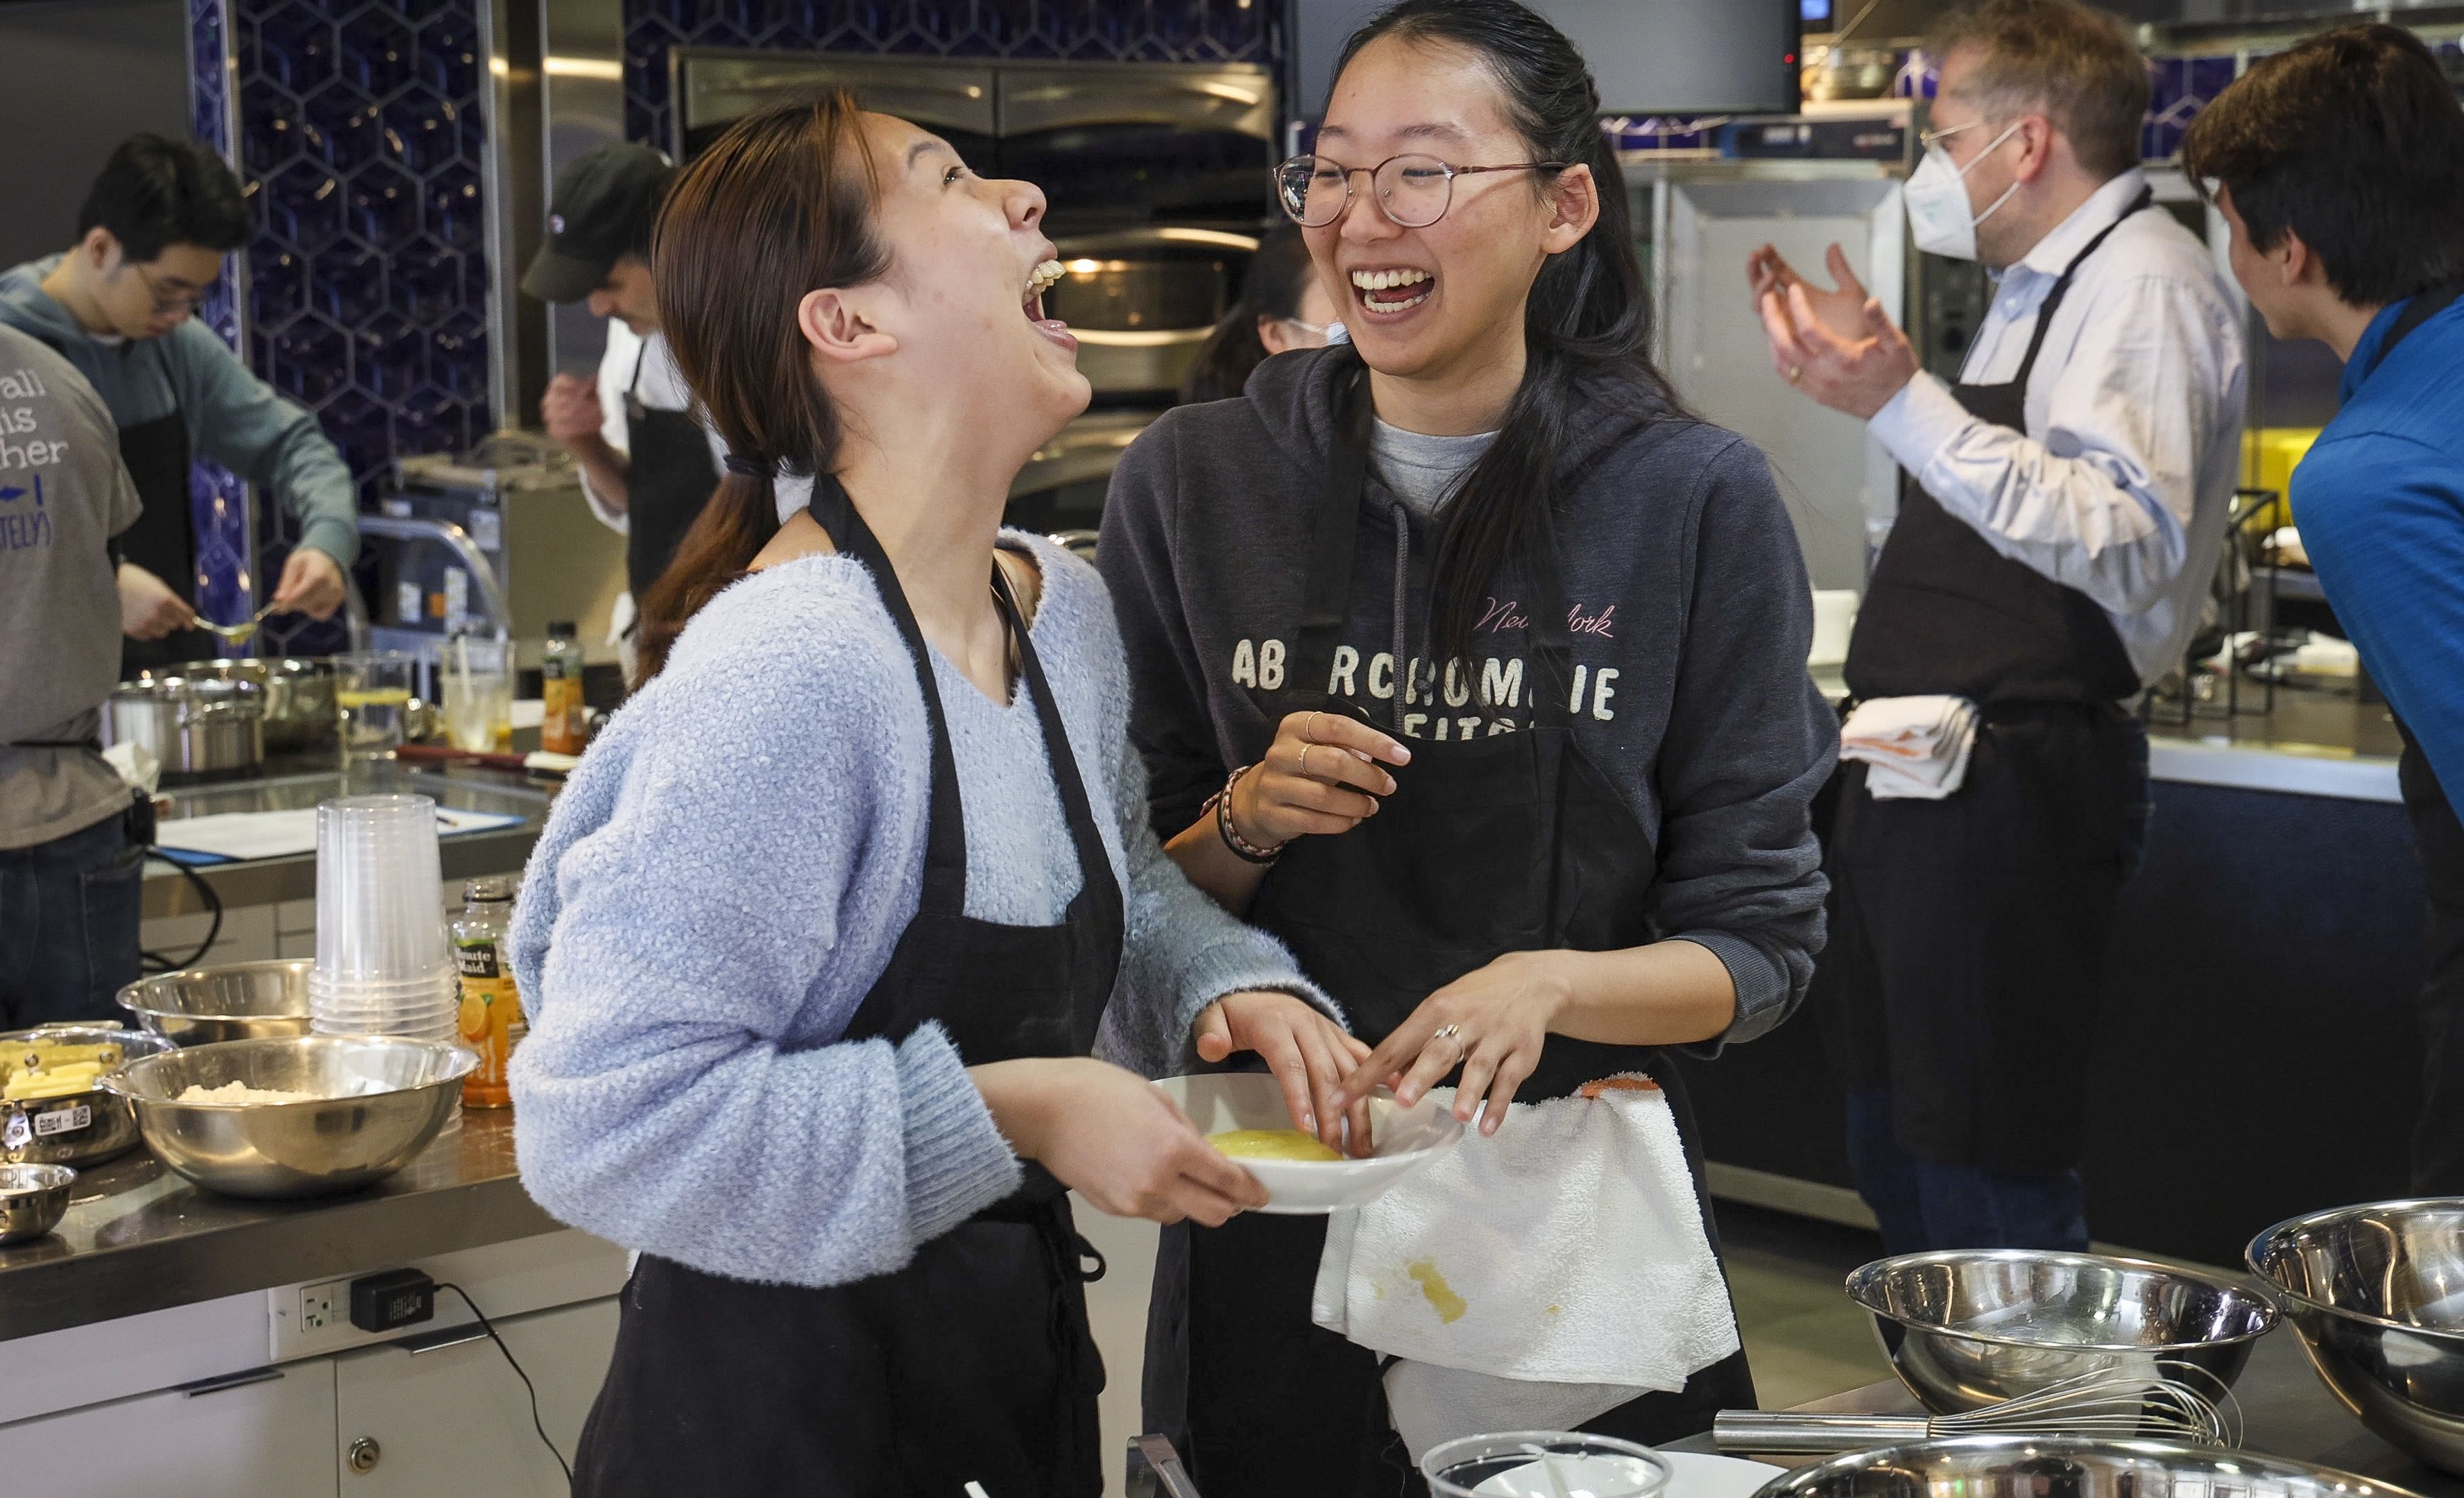 Two students laugh while cooking in a busy industrial kitchen